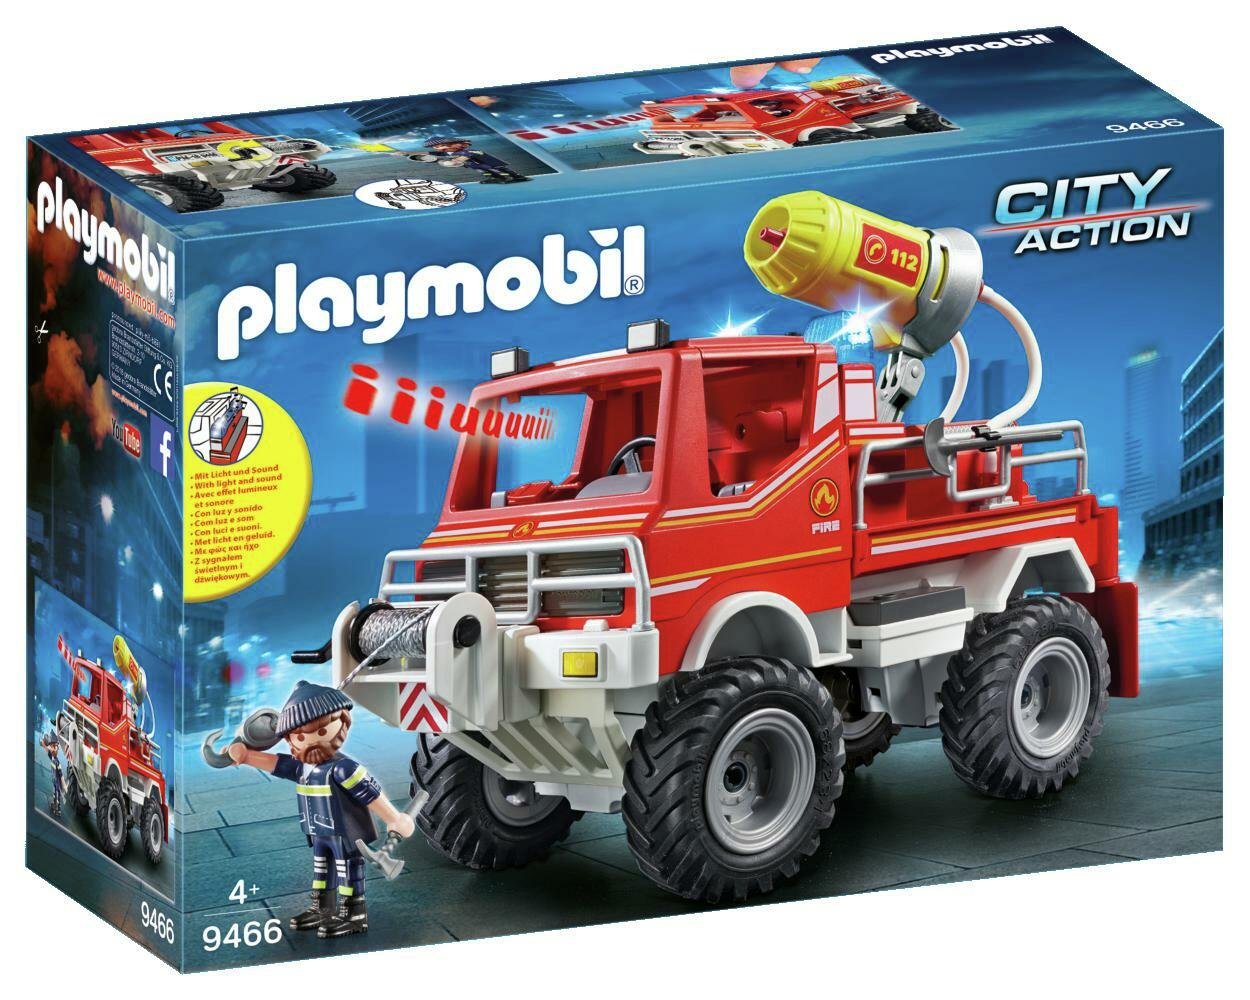 Playmobil 9466 City Action Fire Truck